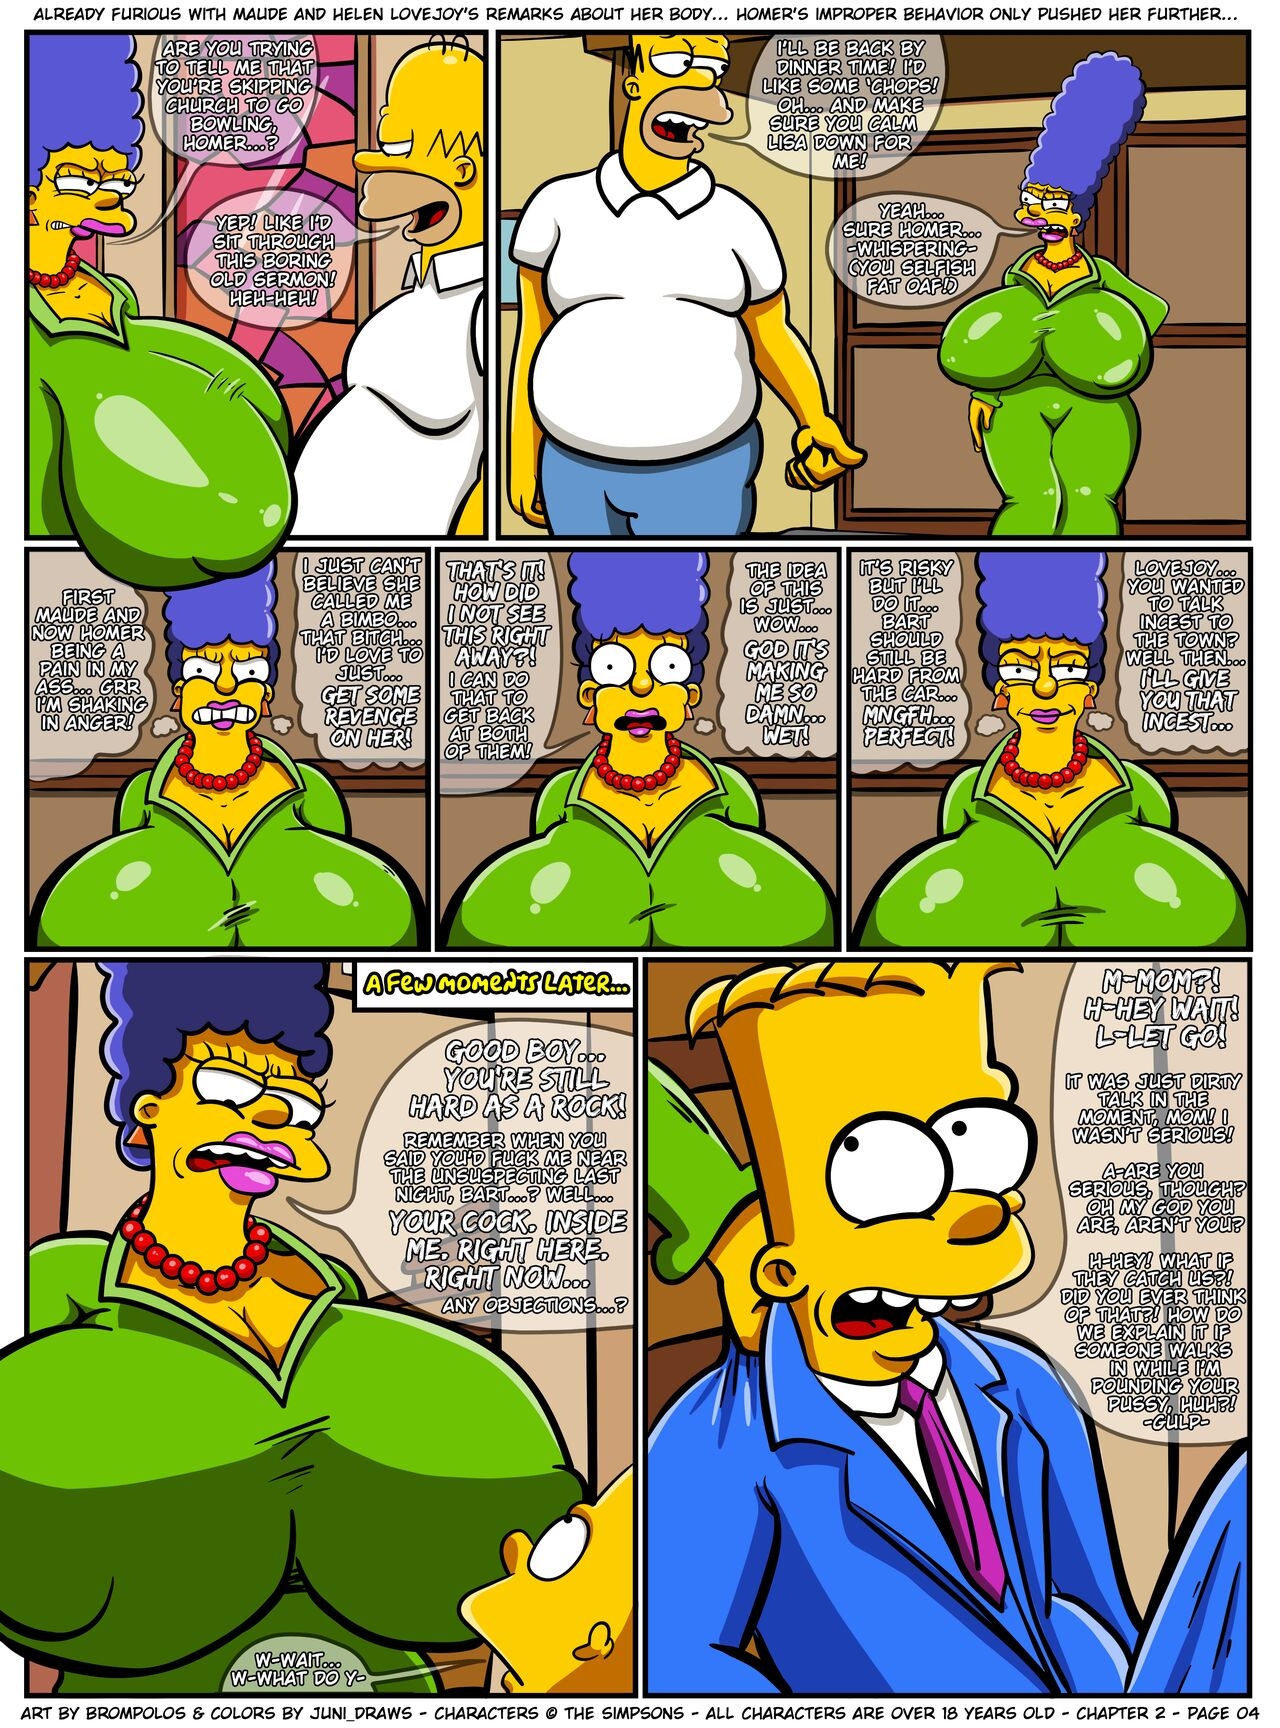 [Brompolos/Juni_Draws] The Sexensteins (Simpsons) [Ongoing] 52